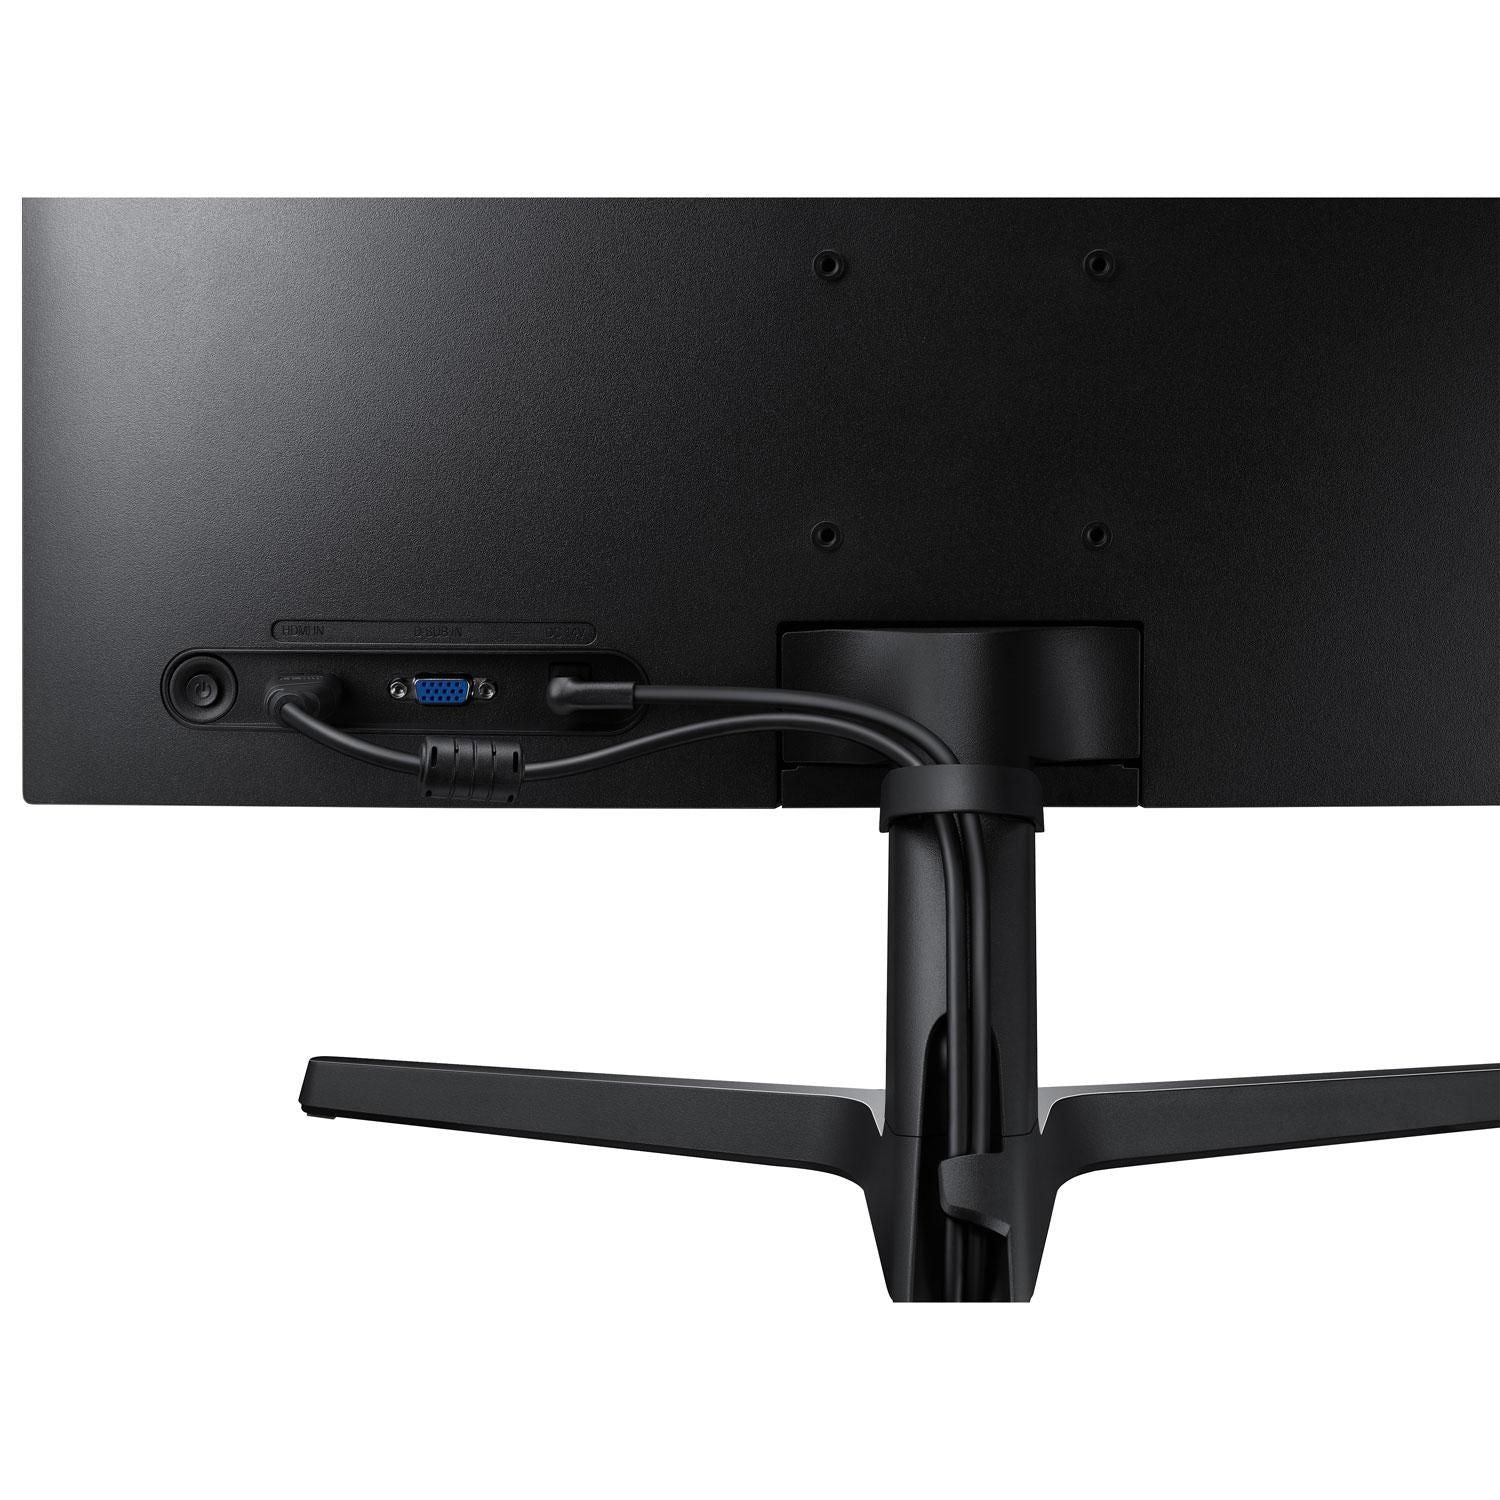 Samsung 27" Monitor with IPS panel and borderless design